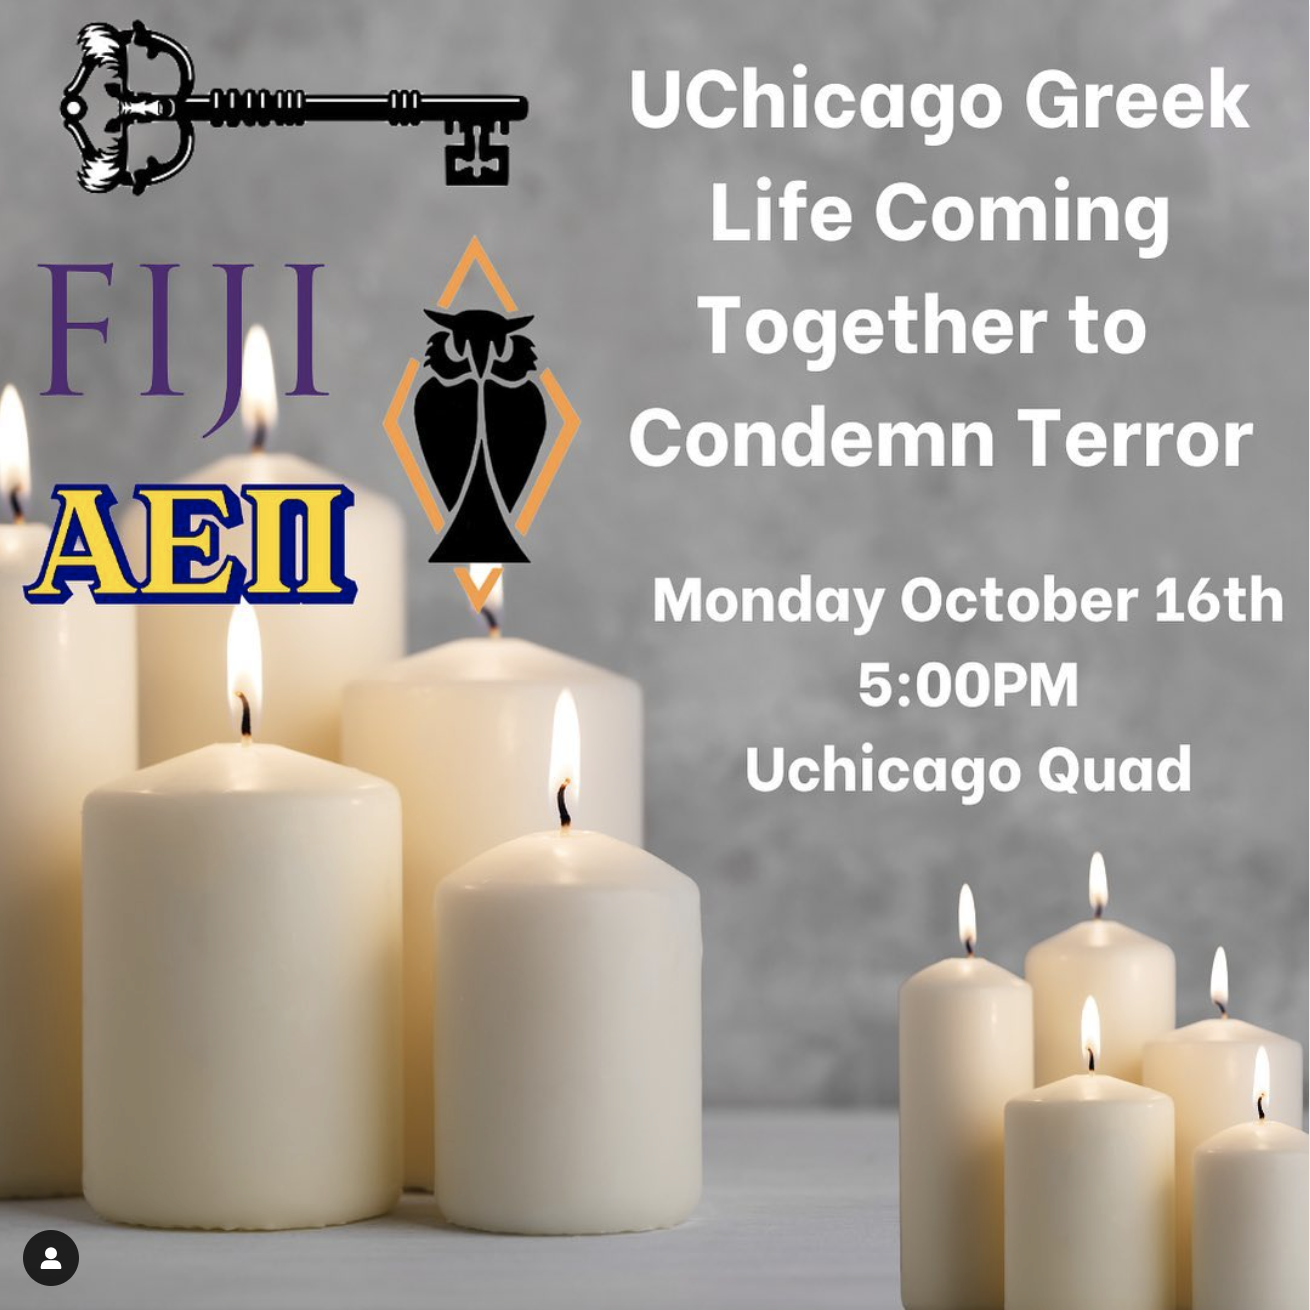 The logos of AEPI, Fiji, Psi, and the Iron Key Society are in the top left. In the top right, text reads UChicago Greek Life Coming Together to Condemn Terror Monday October 16th, 5:00pm, UChicago Quad. Candles are in the background.